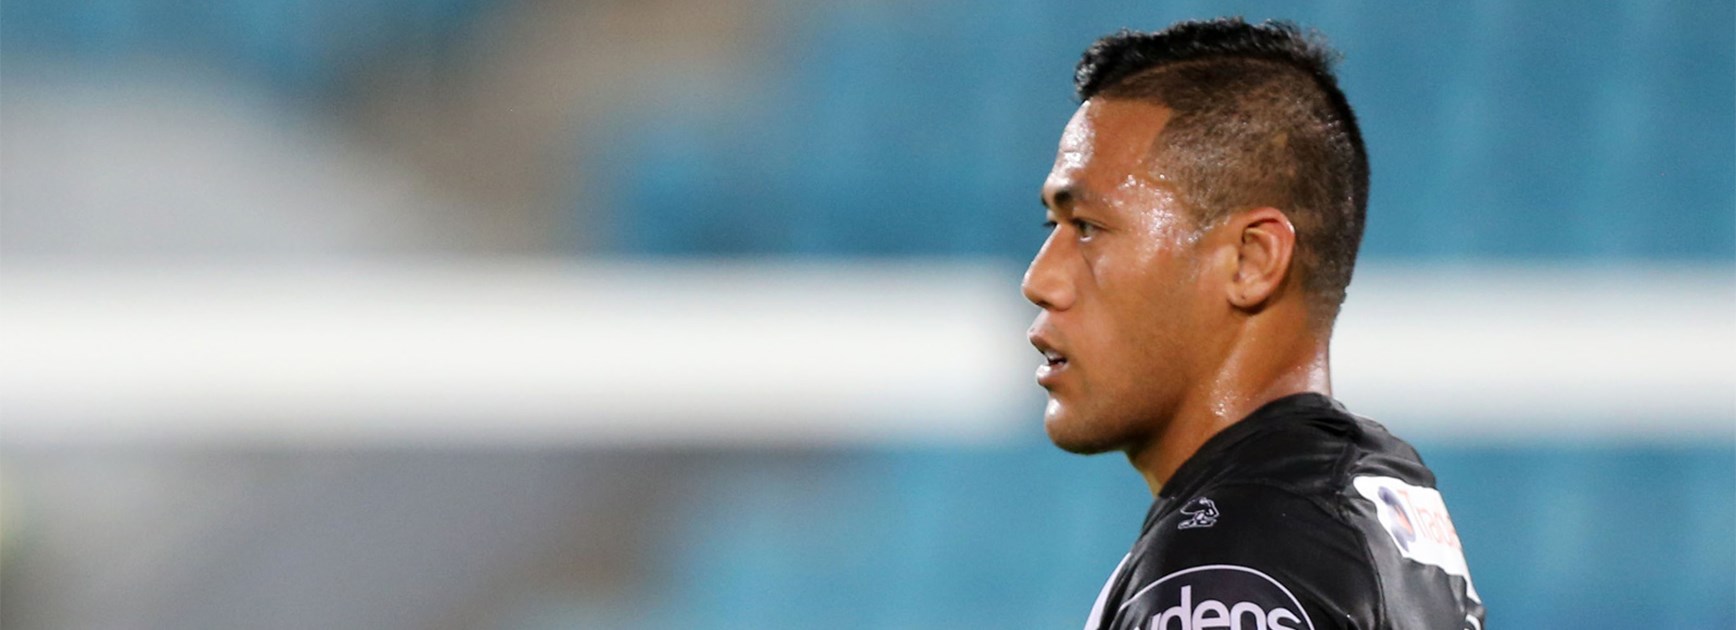 Tim Simona has been suspended for three matches at the NRL judiciary.